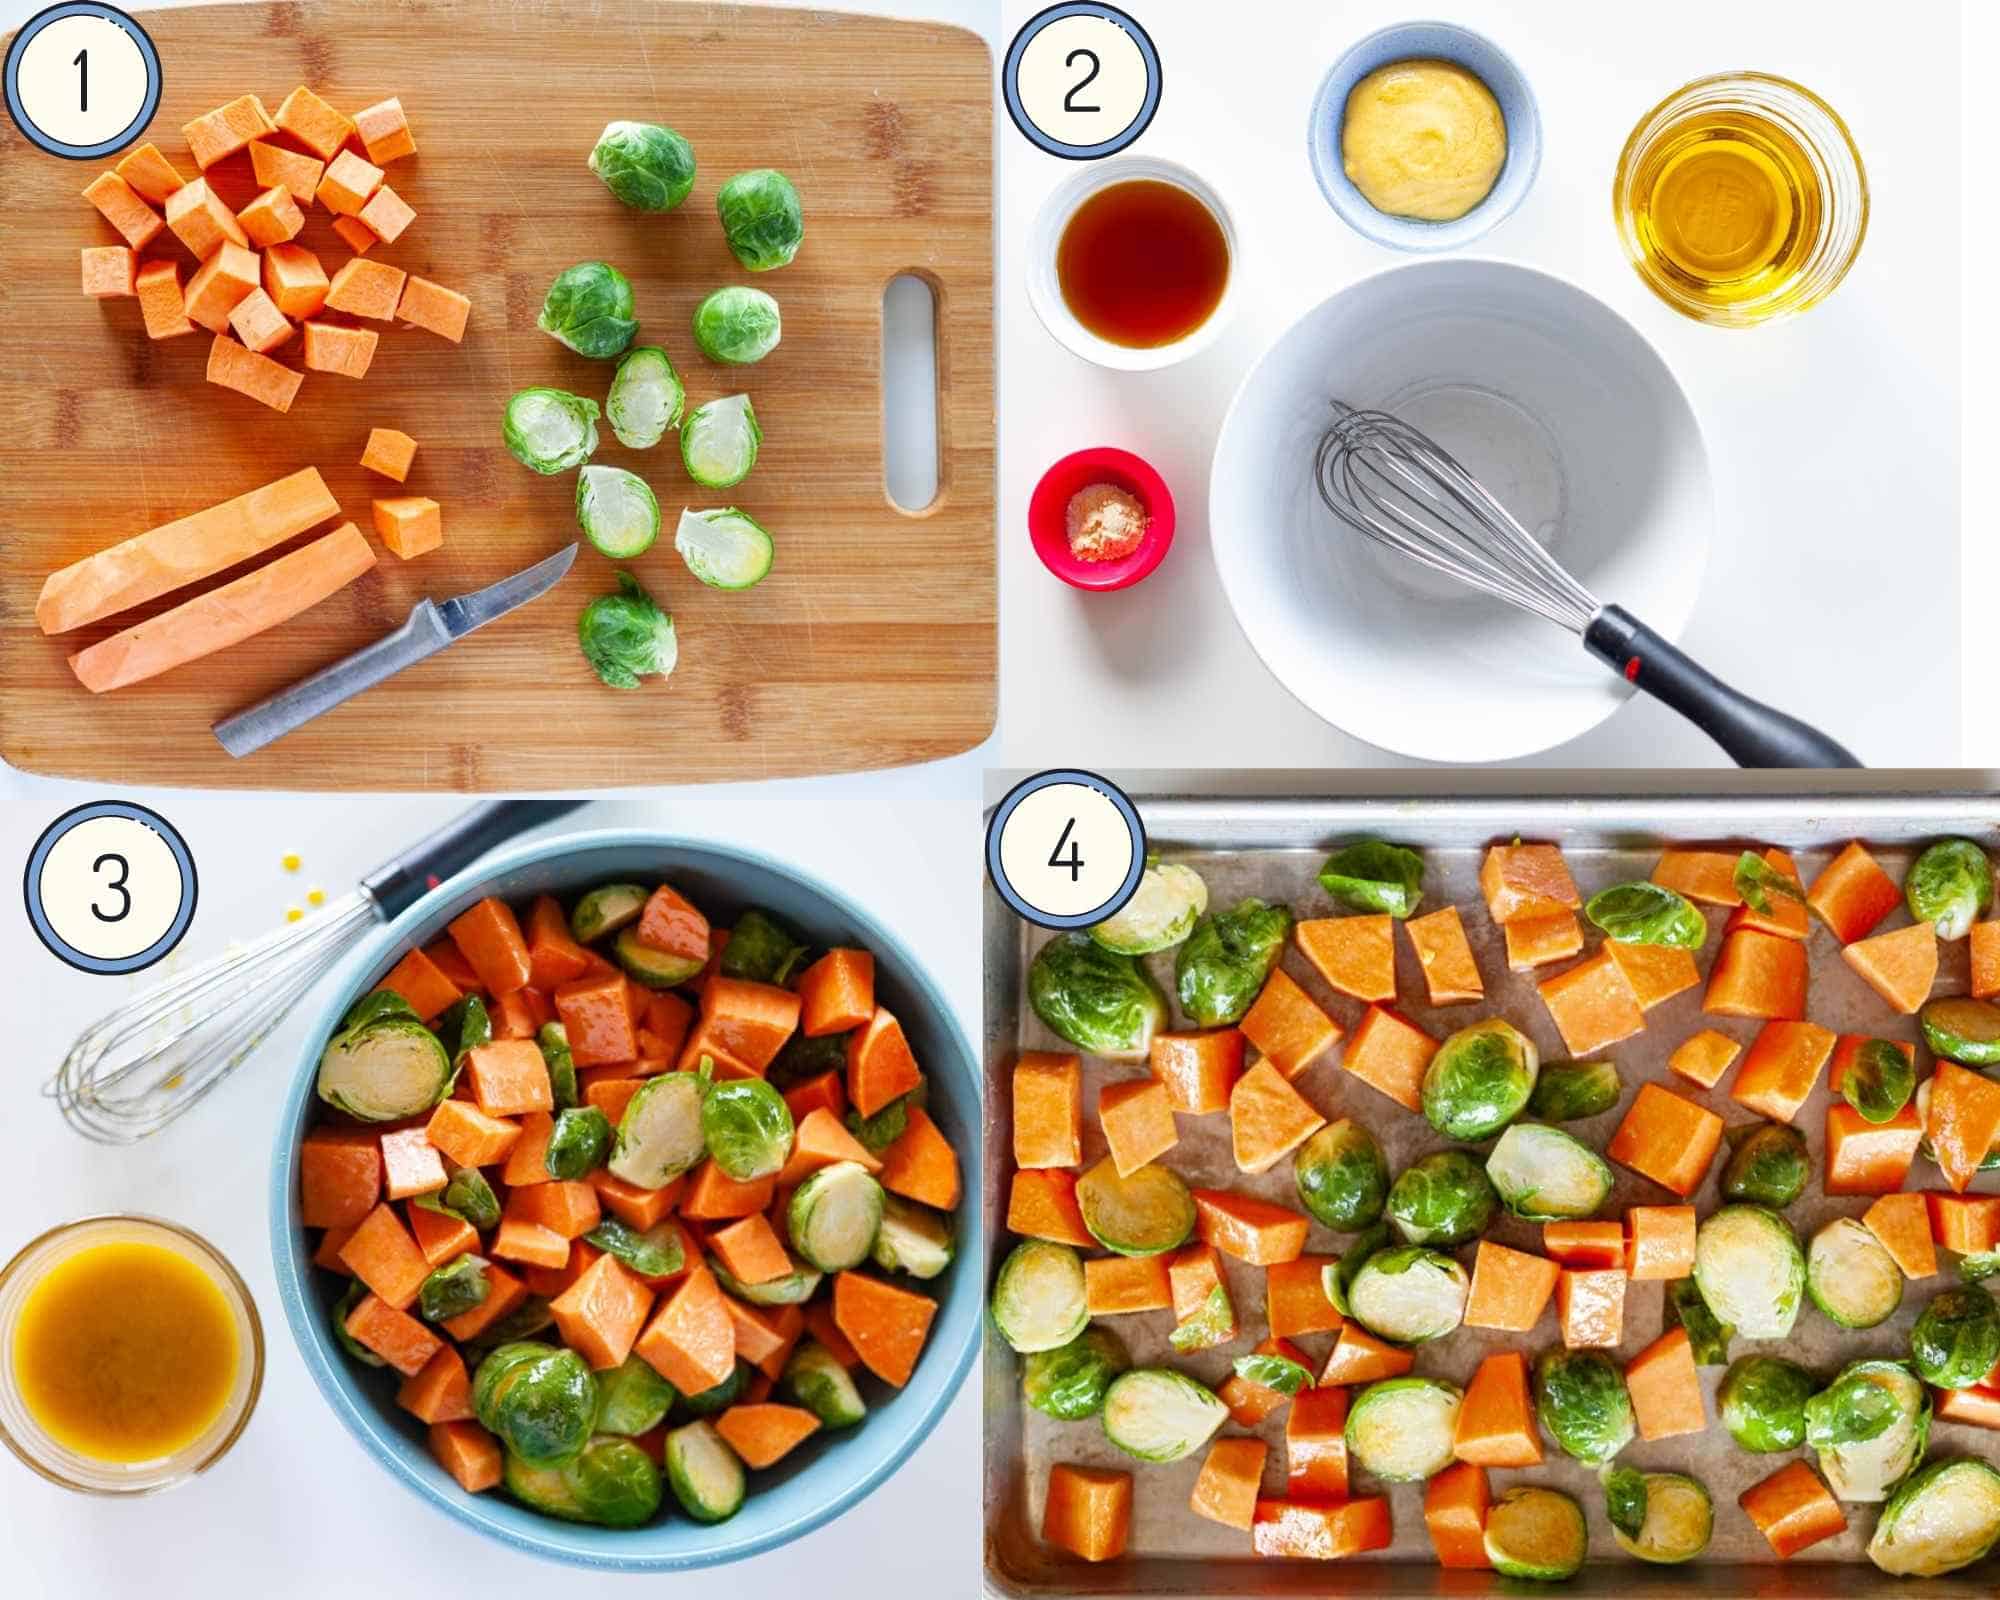 step-by-step instructions for roasting maple dijon roasted Brussels sprouts and sweet potatoes